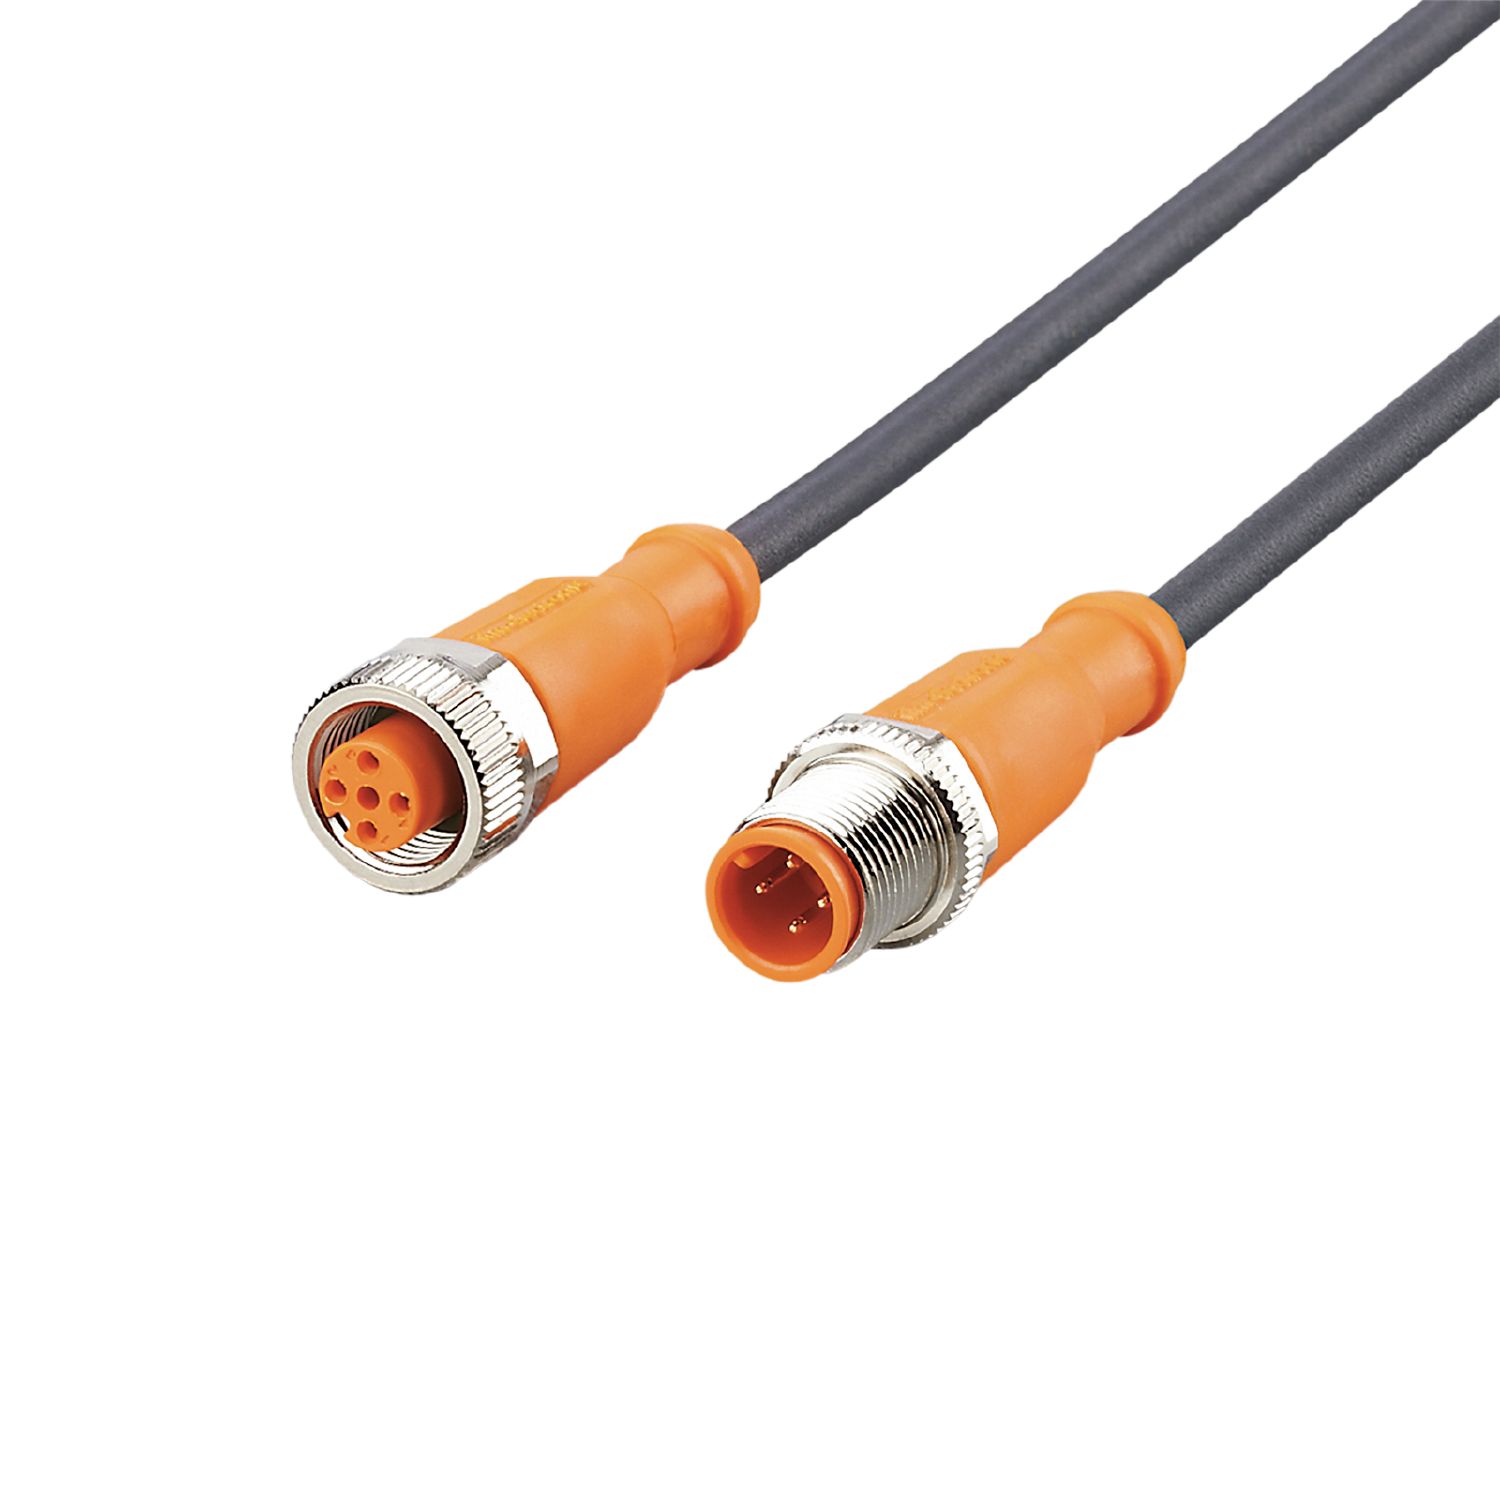 NEW IN BAG! IFM ECOMAT 400 EVC114 CORDSET/CABLE 4m LENGTH 